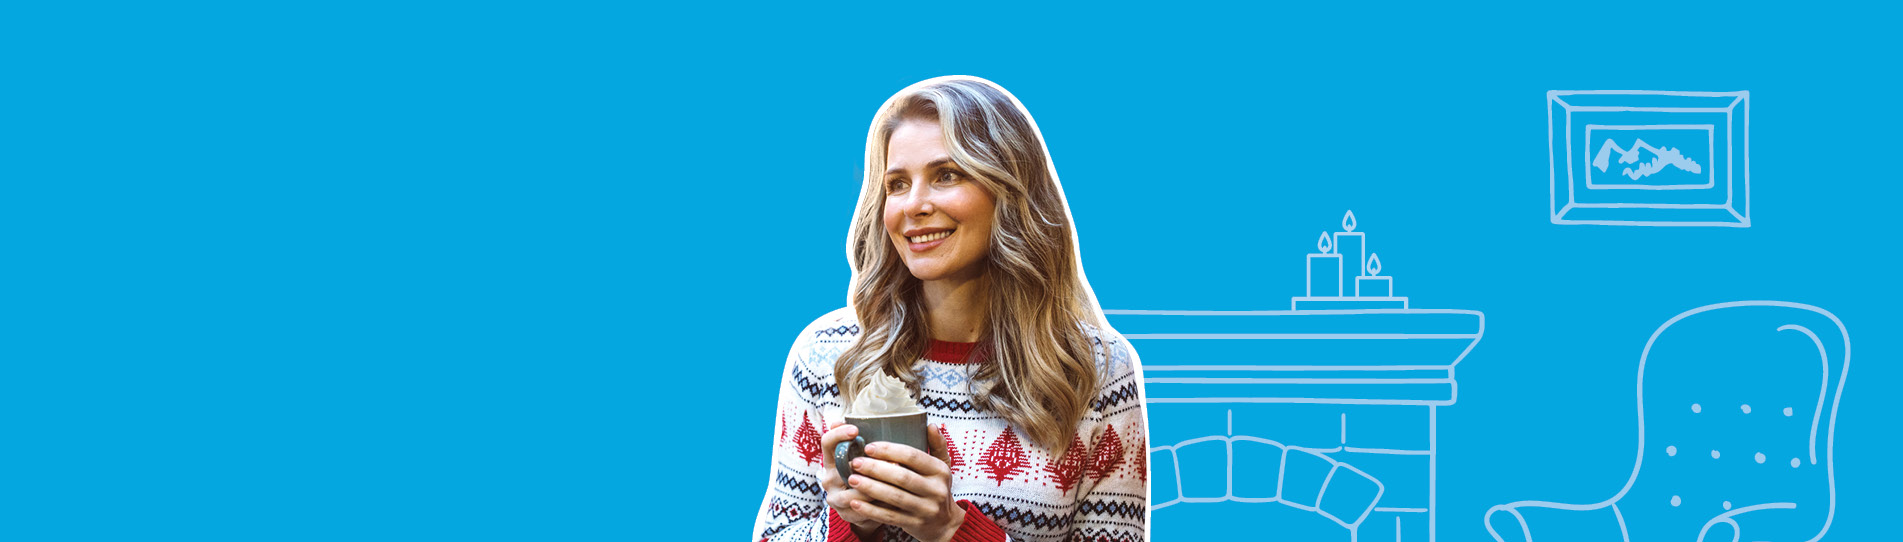 smiling woman wearing a holiday sweater with a peppermint mocha